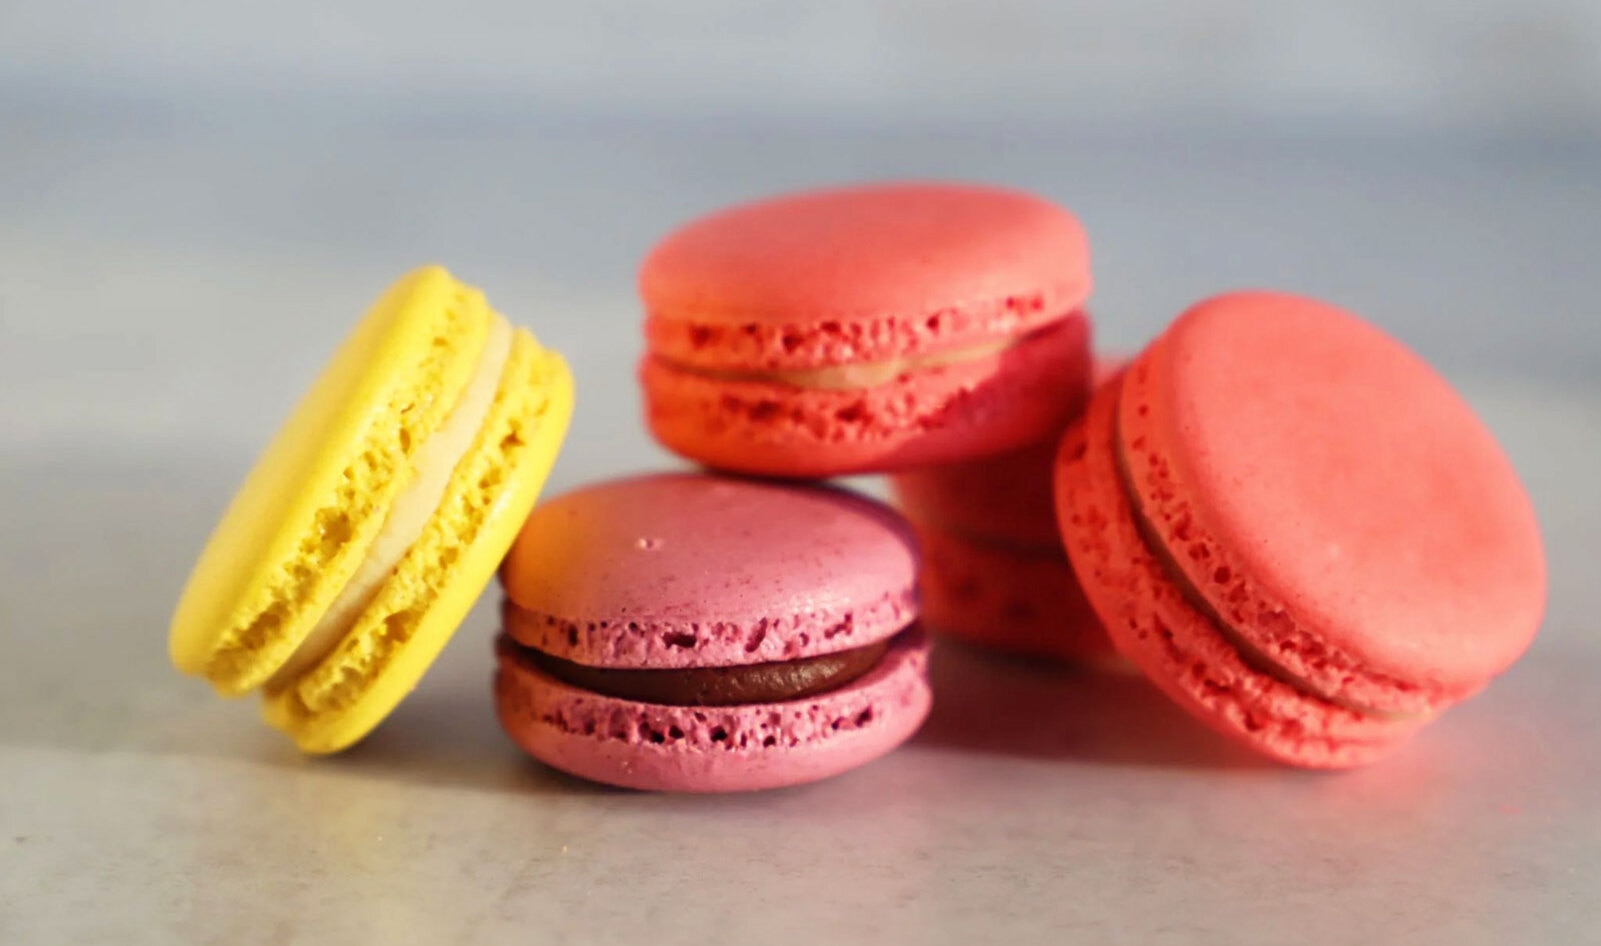 Where to Buy French Macarons—the Holy Grail of Vegan Baked Goods&nbsp;